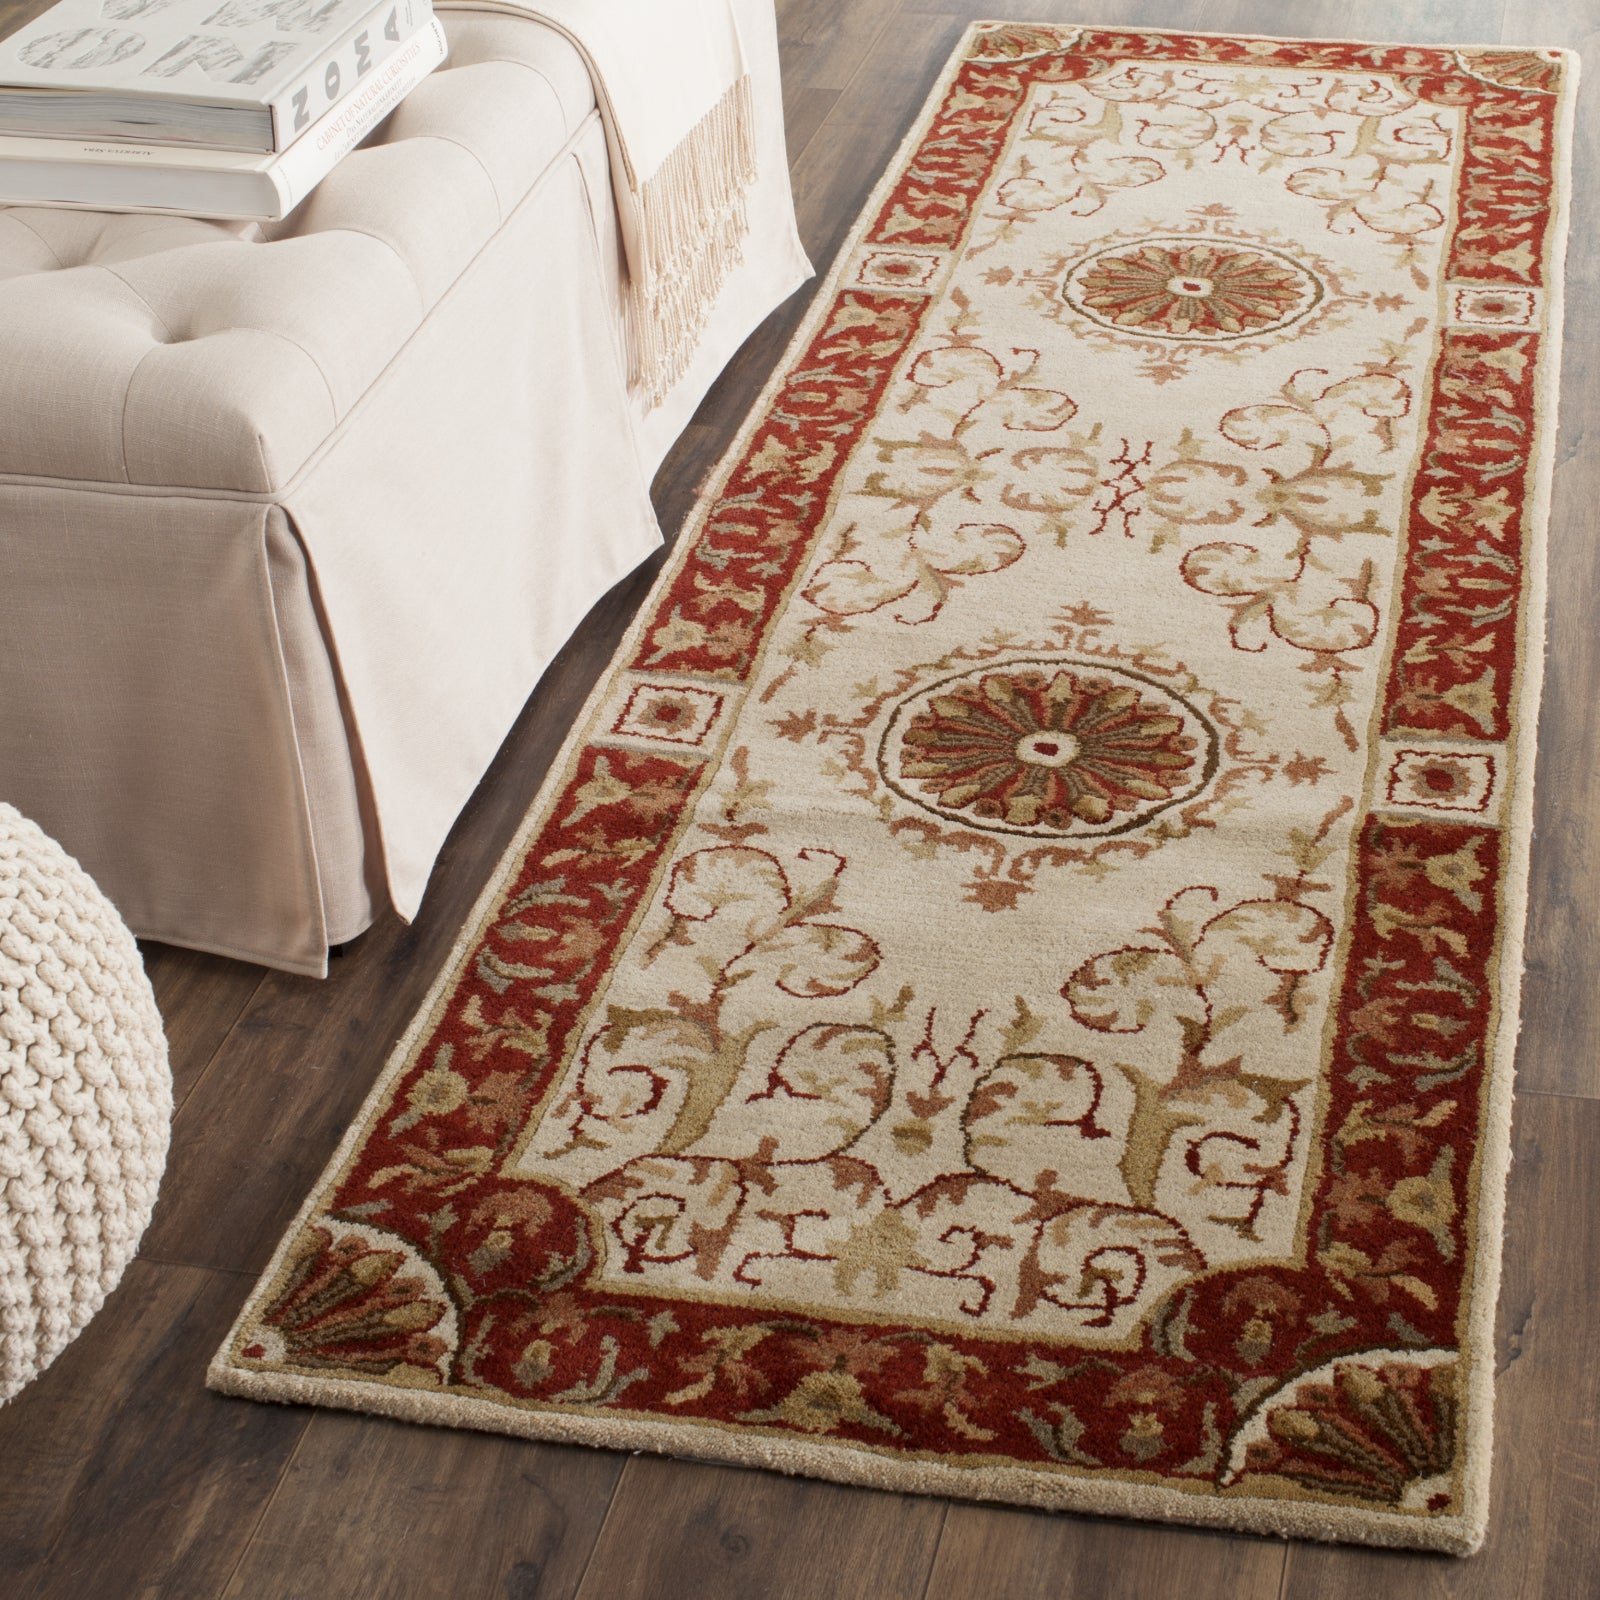 Safavieh Empire 459 Ivory Red Area Rug Incredible Rugs And Decor